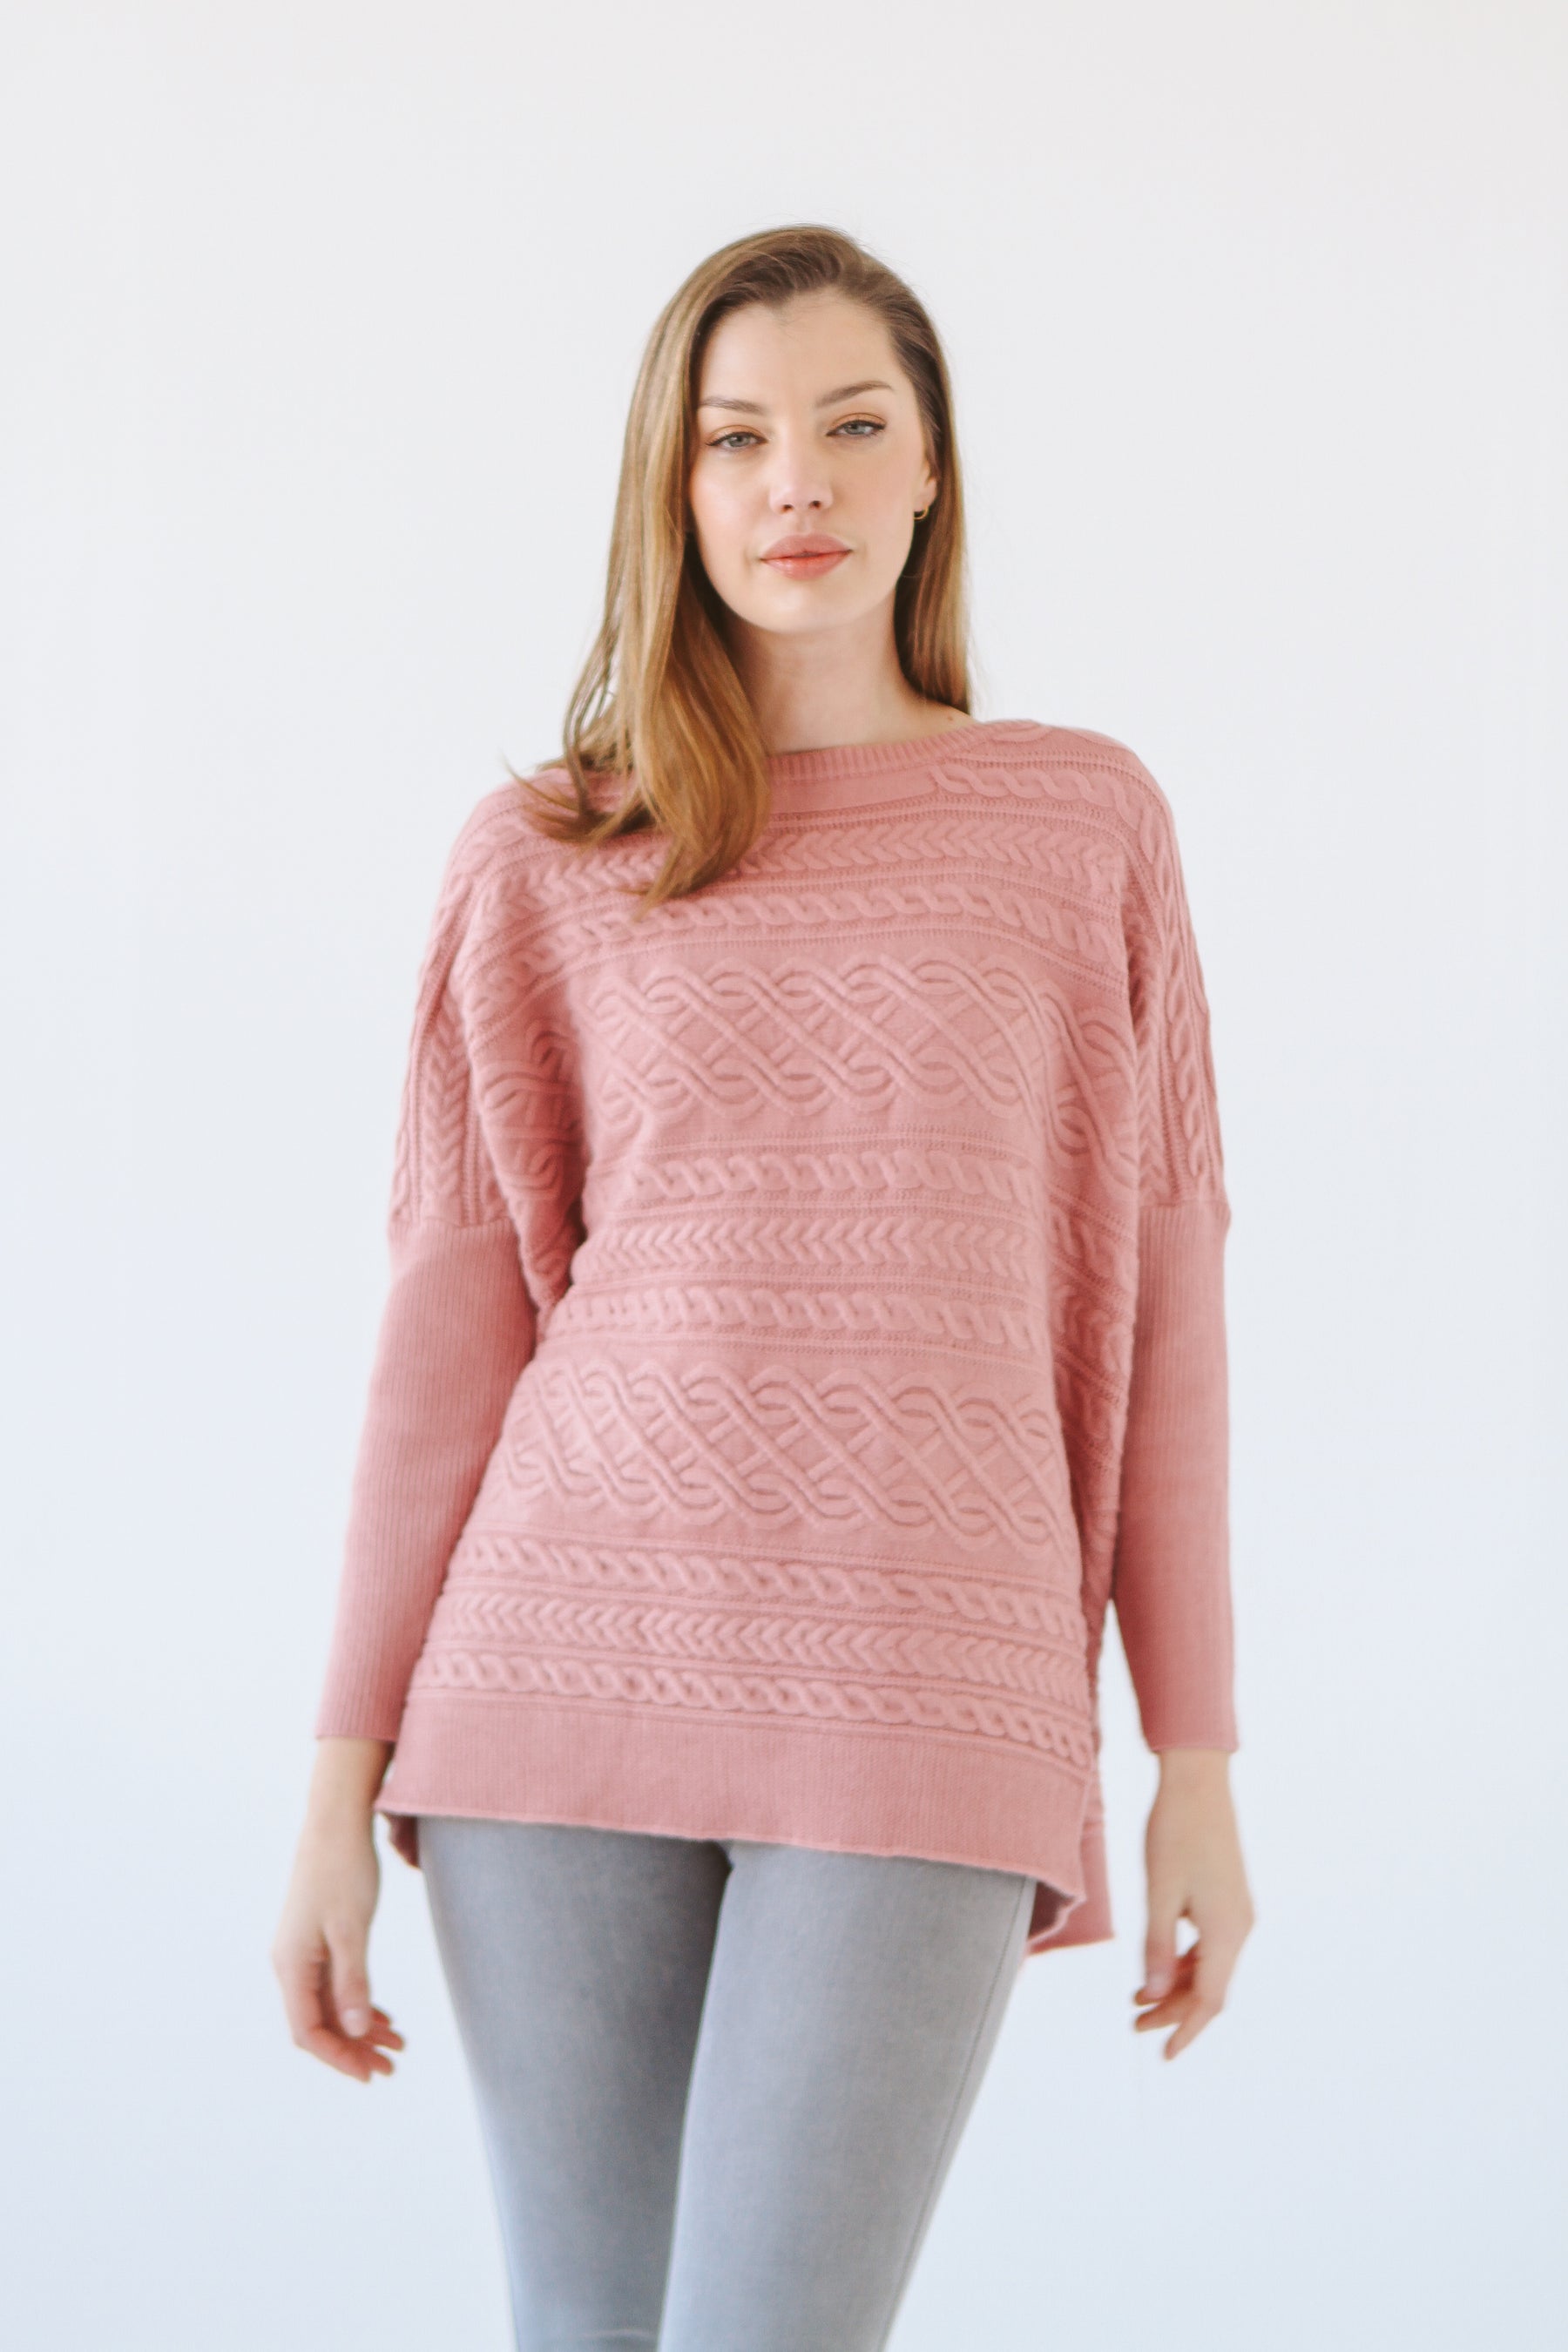 Cable Boxy Jumper